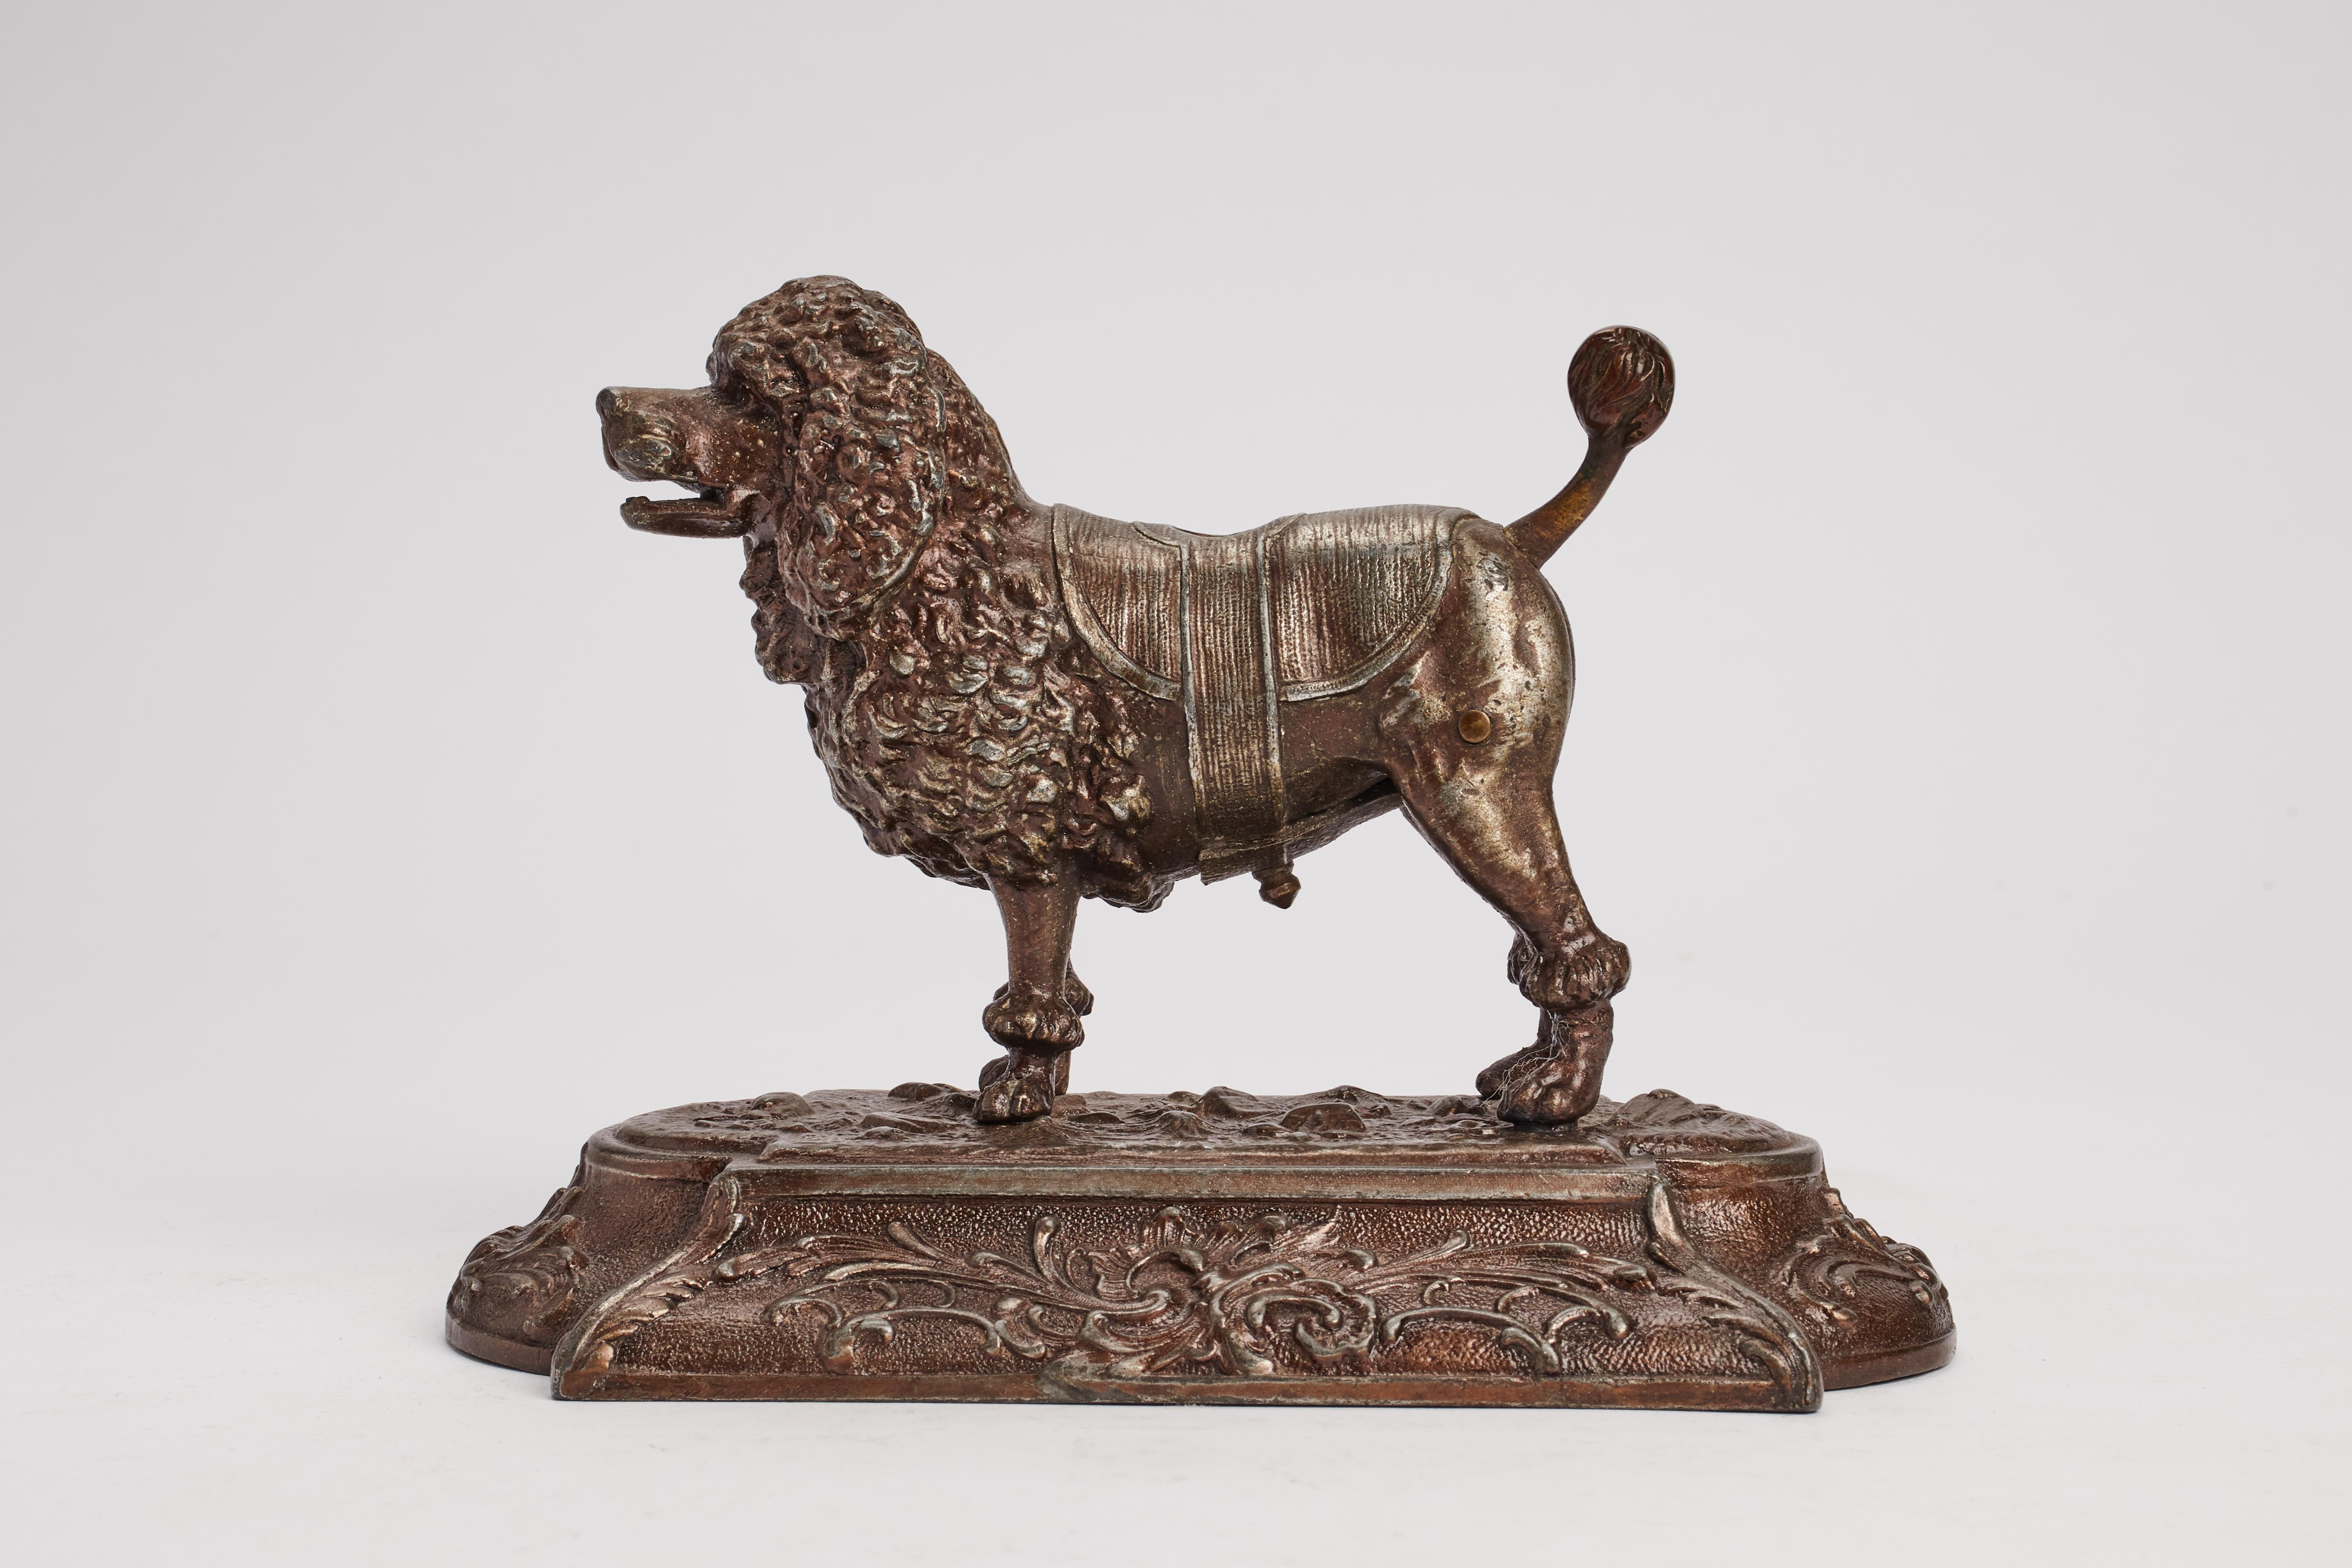 White metal sculpture on a rectangular base depicting a poodle dog acting as a cigar cutter. Signed DRG Musterschutz. Austria around 1890.